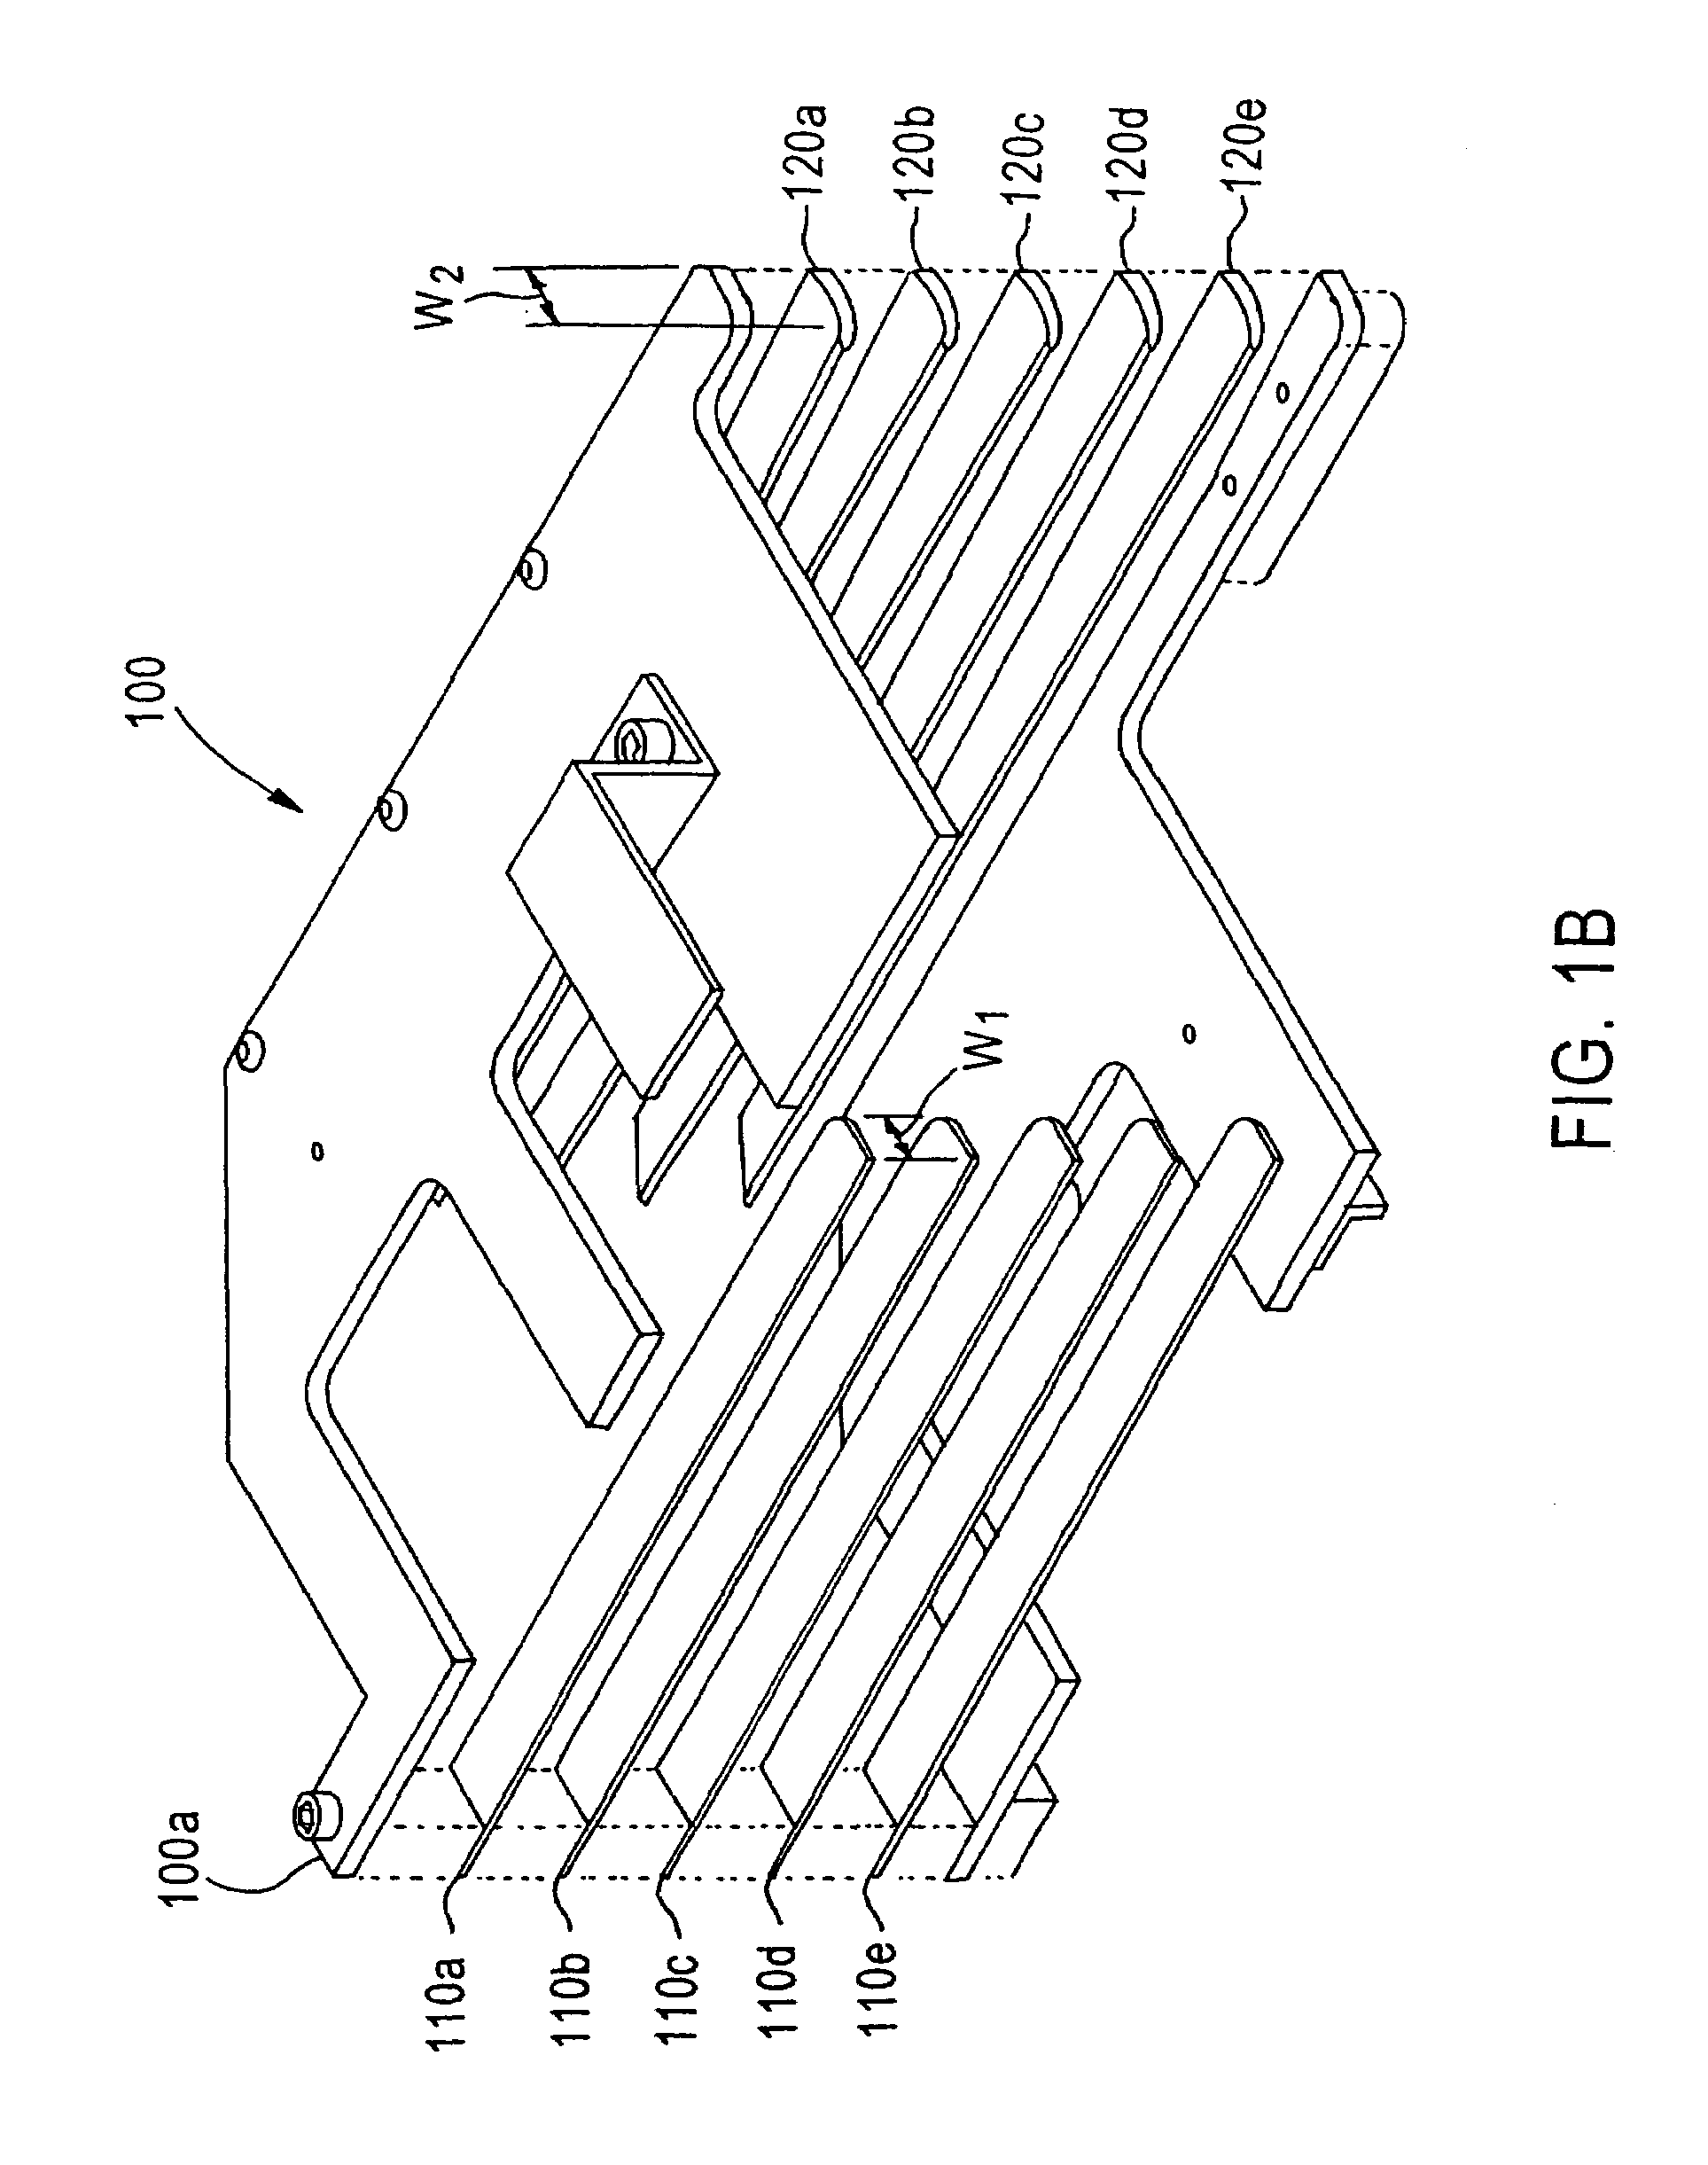 Method and apparatus for handling thin semiconductor wafers